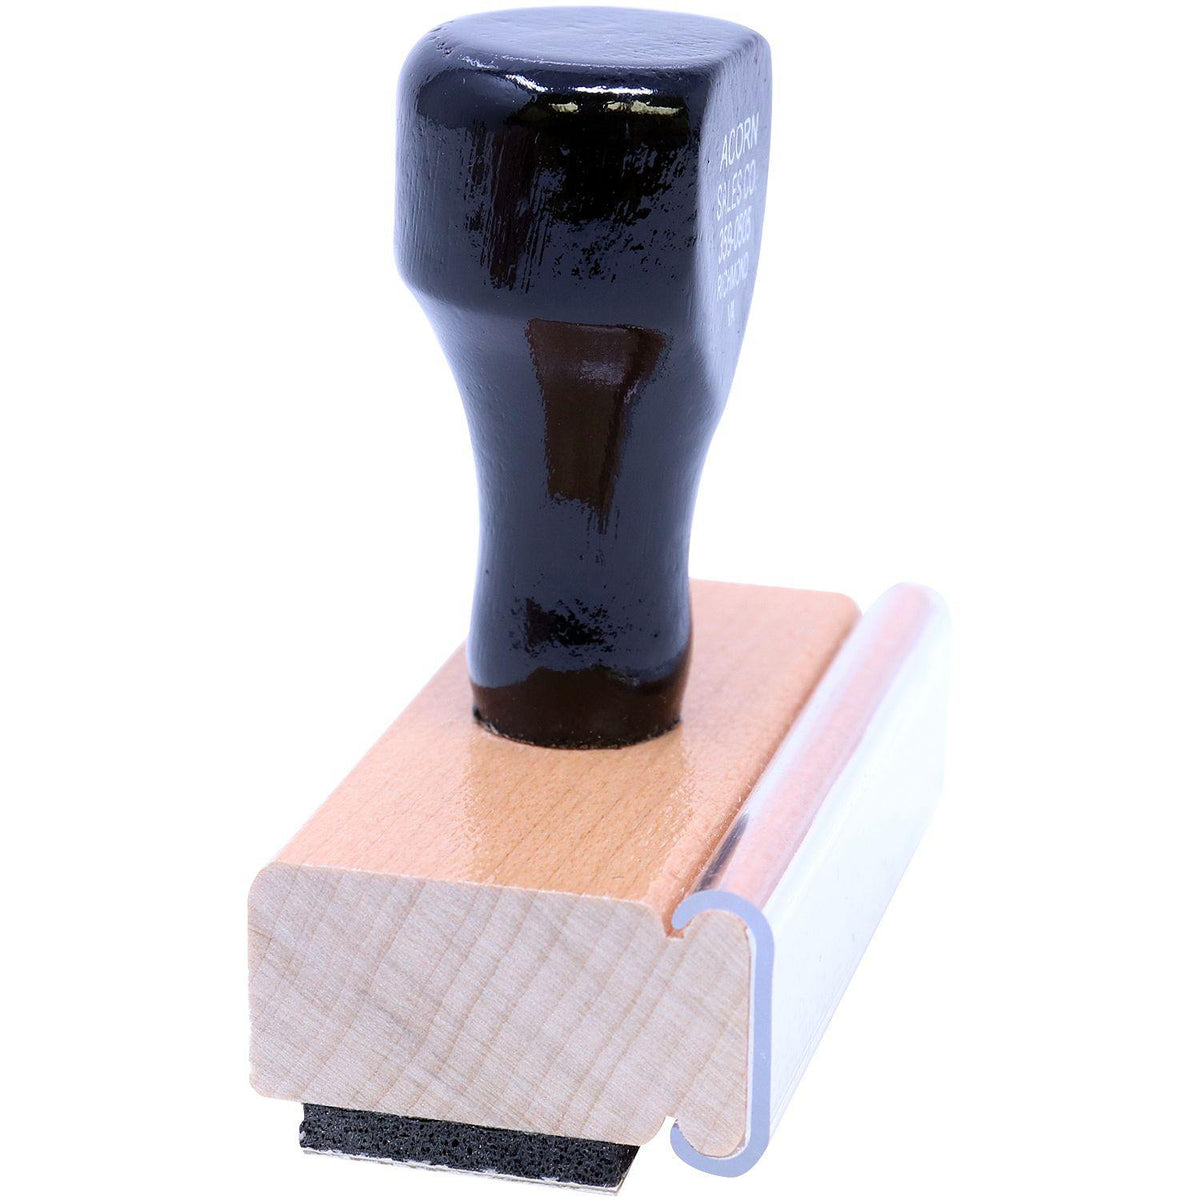 Side View of Large Second Notice Rubber Stamp at an Angle